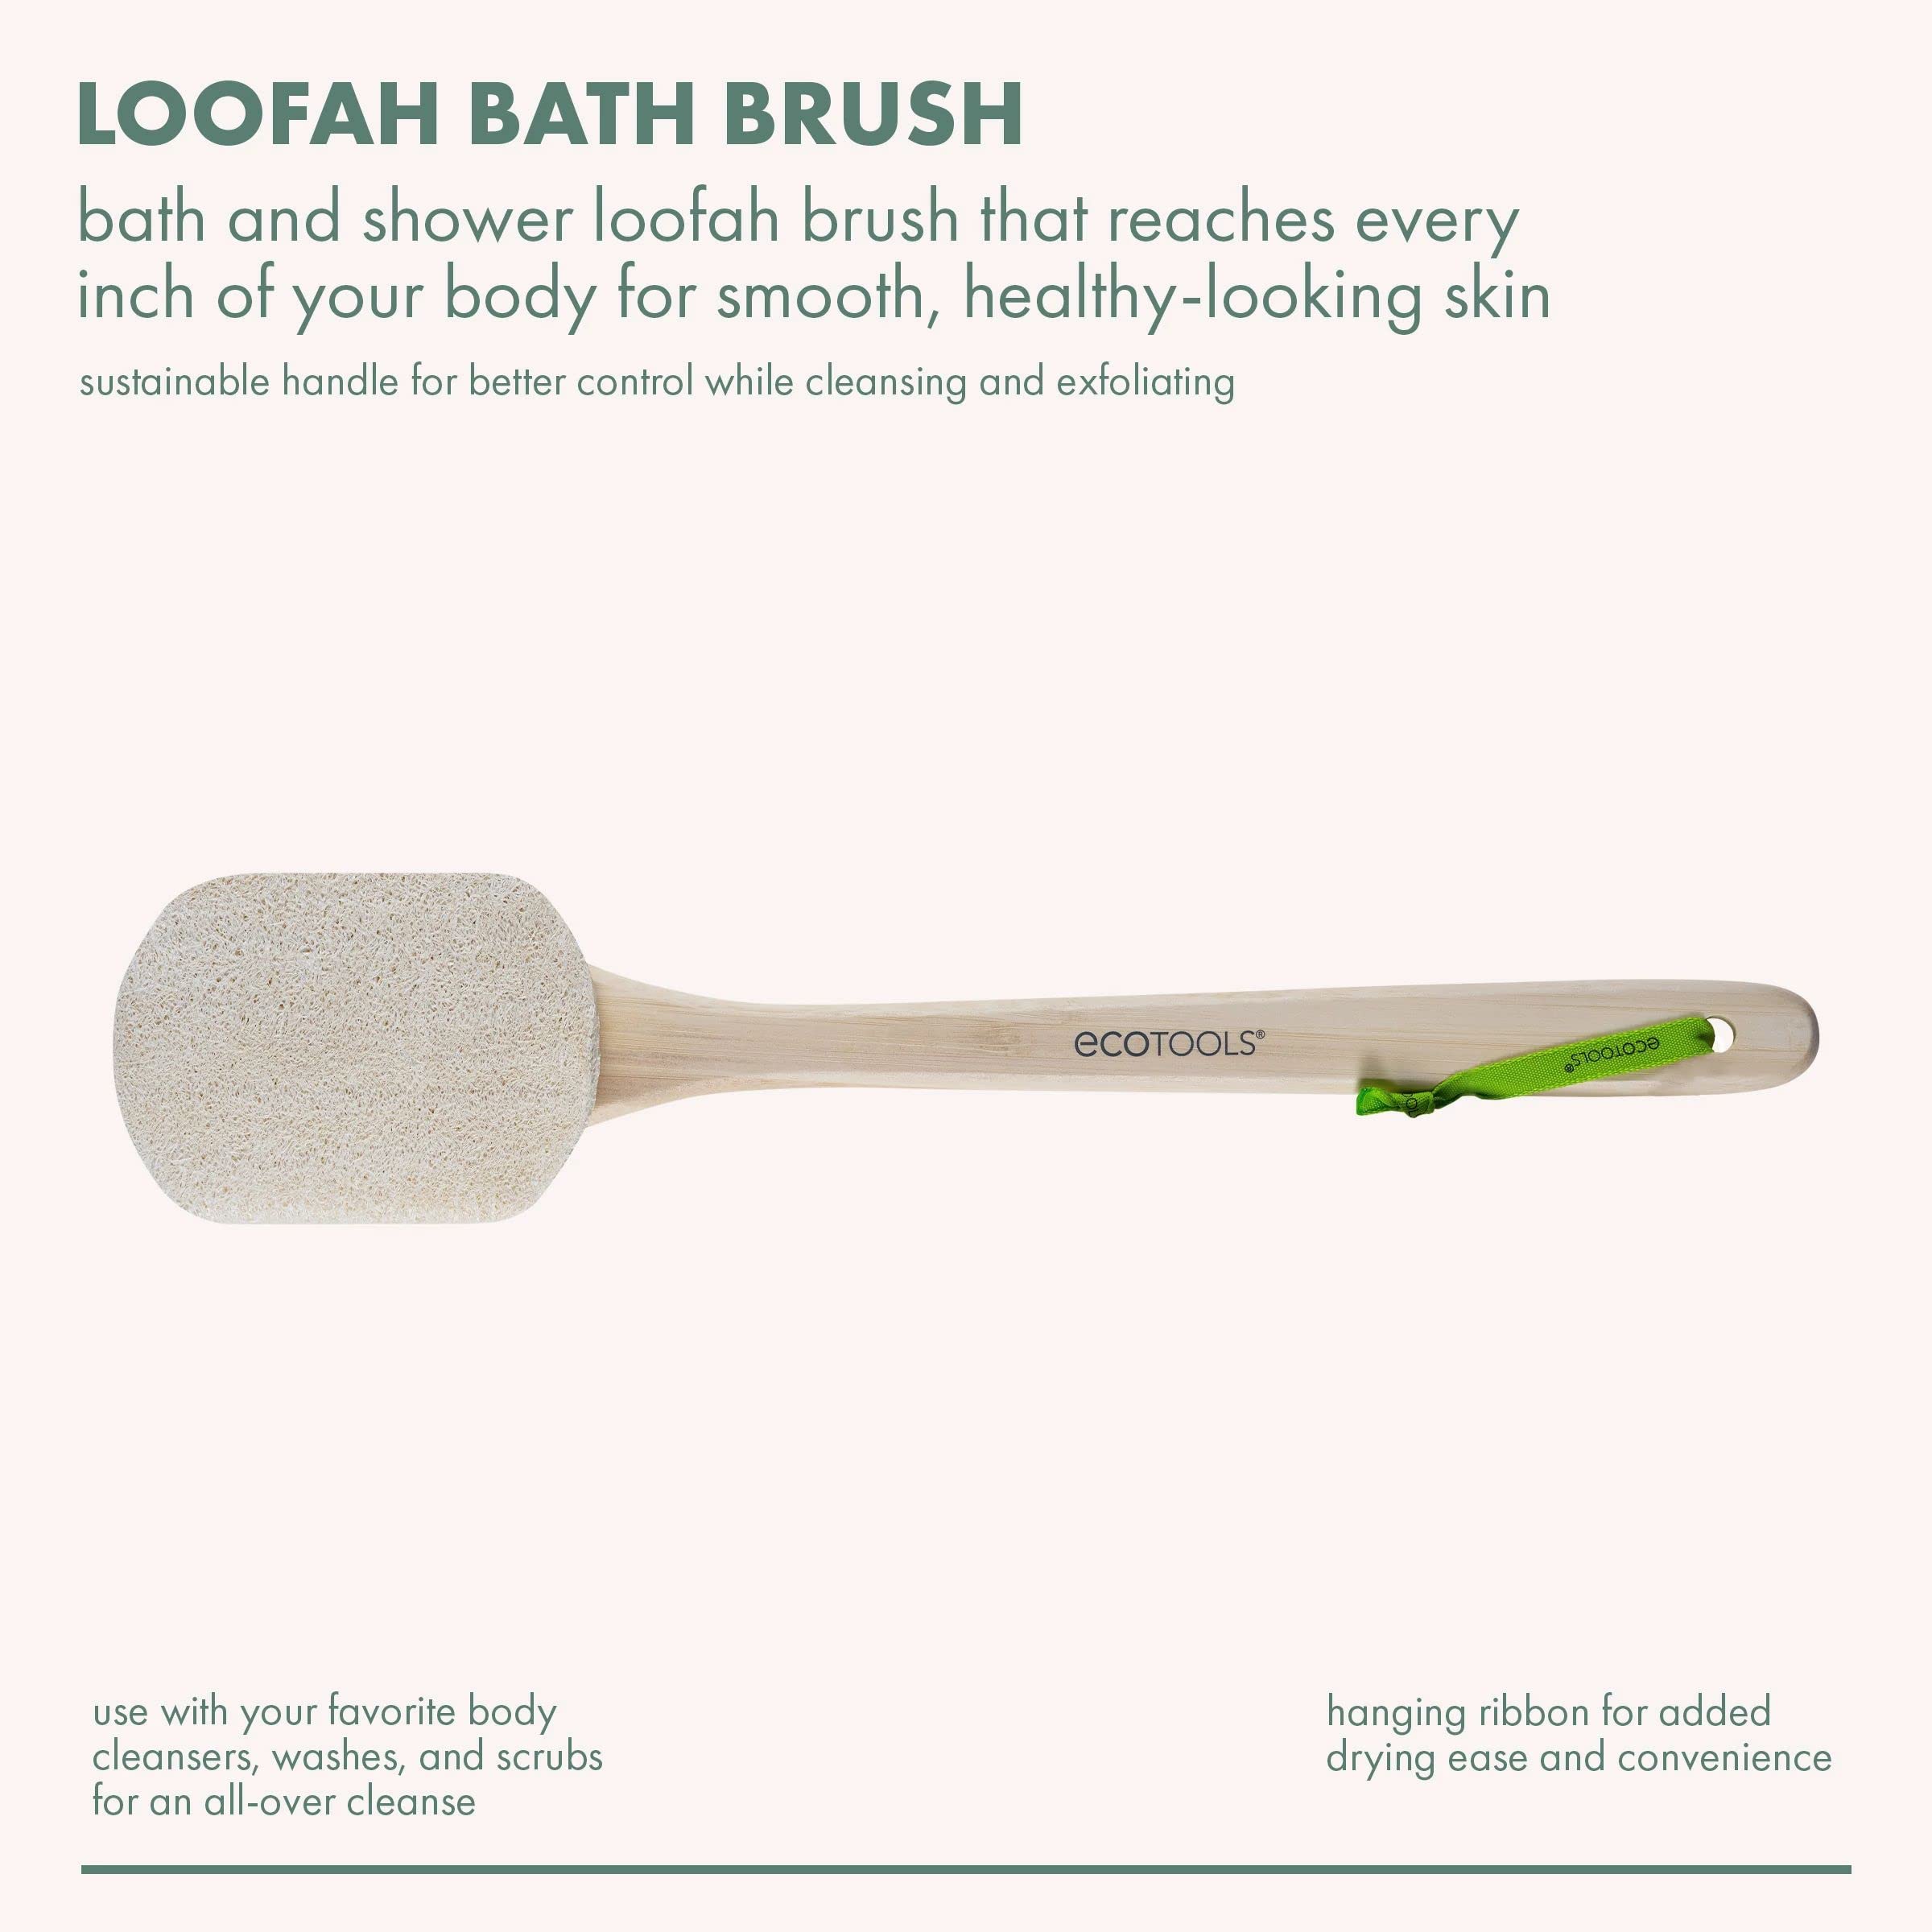 EcoTools Loofah Bath Brush, Shower Brush with Ergonomic Handle, Cleans Hard to Reach Areas, Eco-Friendly Bath Sponge, Gentle Cleansing & Exfoliating, Vegan & Cruelty-Free, 2 Count